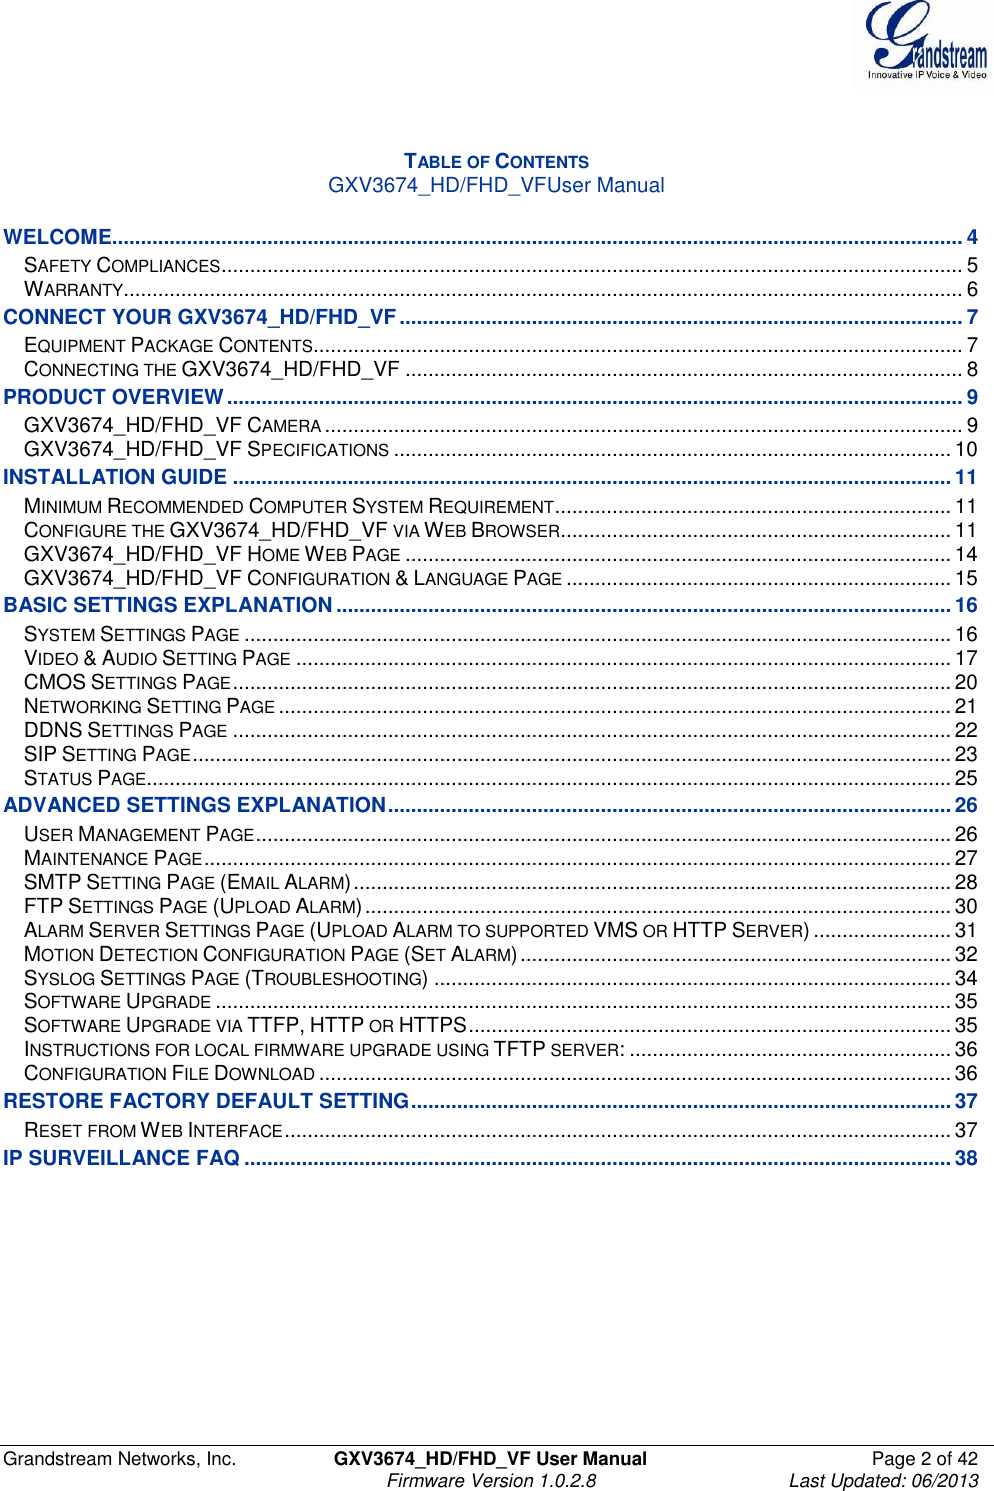  Grandstream Networks, Inc.  GXV3674_HD/FHD_VF User Manual  Page 2 of 42   Firmware Version 1.0.2.8  Last Updated: 06/2013    TABLE OF CONTENTS GXV3674_HD/FHD_VFUser Manual  WELCOME.................................................................................................................................................... 4 SAFETY COMPLIANCES ................................................................................................................................. 5 WARRANTY .................................................................................................................................................. 6 CONNECT YOUR GXV3674_HD/FHD_VF .................................................................................................. 7 EQUIPMENT PACKAGE CONTENTS ................................................................................................................. 7 CONNECTING THE GXV3674_HD/FHD_VF ................................................................................................. 8 PRODUCT OVERVIEW ................................................................................................................................ 9 GXV3674_HD/FHD_VF CAMERA ............................................................................................................... 9 GXV3674_HD/FHD_VF SPECIFICATIONS ................................................................................................. 10 INSTALLATION GUIDE ............................................................................................................................. 11 MINIMUM RECOMMENDED COMPUTER SYSTEM REQUIREMENT ..................................................................... 11 CONFIGURE THE GXV3674_HD/FHD_VF VIA WEB BROWSER .................................................................... 11 GXV3674_HD/FHD_VF HOME WEB PAGE ............................................................................................... 14 GXV3674_HD/FHD_VF CONFIGURATION &amp; LANGUAGE PAGE ................................................................... 15 BASIC SETTINGS EXPLANATION ........................................................................................................... 16 SYSTEM SETTINGS PAGE ........................................................................................................................... 16 VIDEO &amp; AUDIO SETTING PAGE .................................................................................................................. 17 CMOS SETTINGS PAGE ............................................................................................................................. 20 NETWORKING SETTING PAGE ..................................................................................................................... 21 DDNS SETTINGS PAGE ............................................................................................................................. 22 SIP SETTING PAGE .................................................................................................................................... 23 STATUS PAGE ............................................................................................................................................ 25 ADVANCED SETTINGS EXPLANATION .................................................................................................. 26 USER MANAGEMENT PAGE ......................................................................................................................... 26 MAINTENANCE PAGE .................................................................................................................................. 27 SMTP SETTING PAGE (EMAIL ALARM) ........................................................................................................ 28 FTP SETTINGS PAGE (UPLOAD ALARM) ...................................................................................................... 30 ALARM SERVER SETTINGS PAGE (UPLOAD ALARM TO SUPPORTED VMS OR HTTP SERVER) ........................ 31 MOTION DETECTION CONFIGURATION PAGE (SET ALARM) ........................................................................... 32 SYSLOG SETTINGS PAGE (TROUBLESHOOTING) .......................................................................................... 34 SOFTWARE UPGRADE ................................................................................................................................ 35 SOFTWARE UPGRADE VIA TTFP, HTTP OR HTTPS .................................................................................... 35 INSTRUCTIONS FOR LOCAL FIRMWARE UPGRADE USING TFTP SERVER: ........................................................ 36 CONFIGURATION FILE DOWNLOAD .............................................................................................................. 36 RESTORE FACTORY DEFAULT SETTING .............................................................................................. 37 RESET FROM WEB INTERFACE .................................................................................................................... 37 IP SURVEILLANCE FAQ ........................................................................................................................... 38       